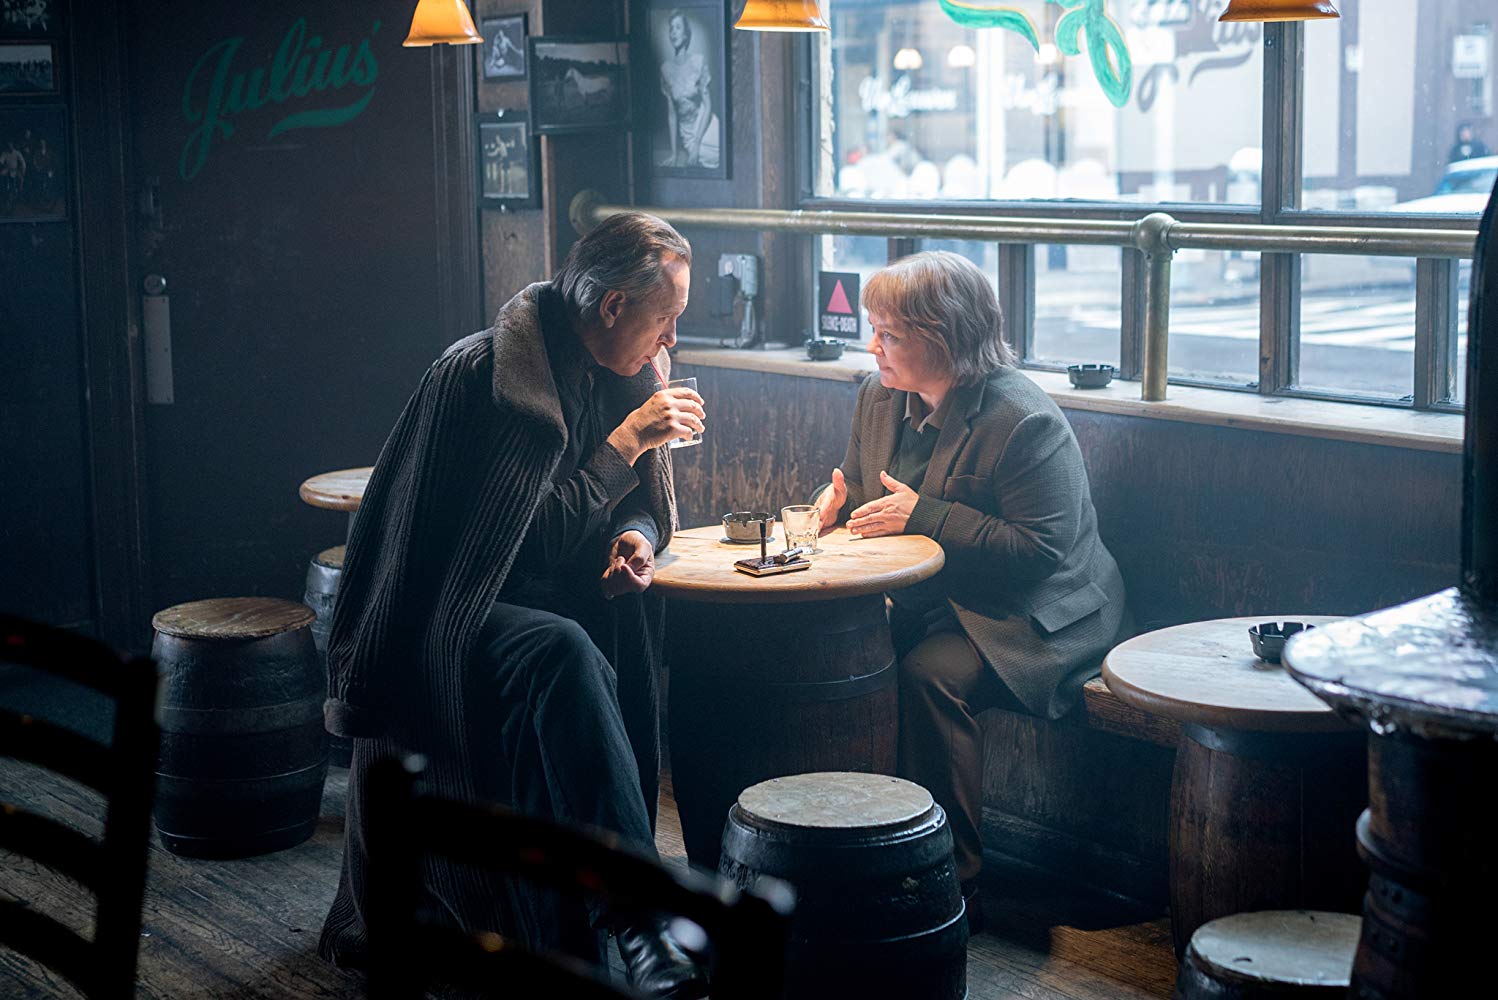 can you ever forgive me?, movie reviews, Lucas Mirabella